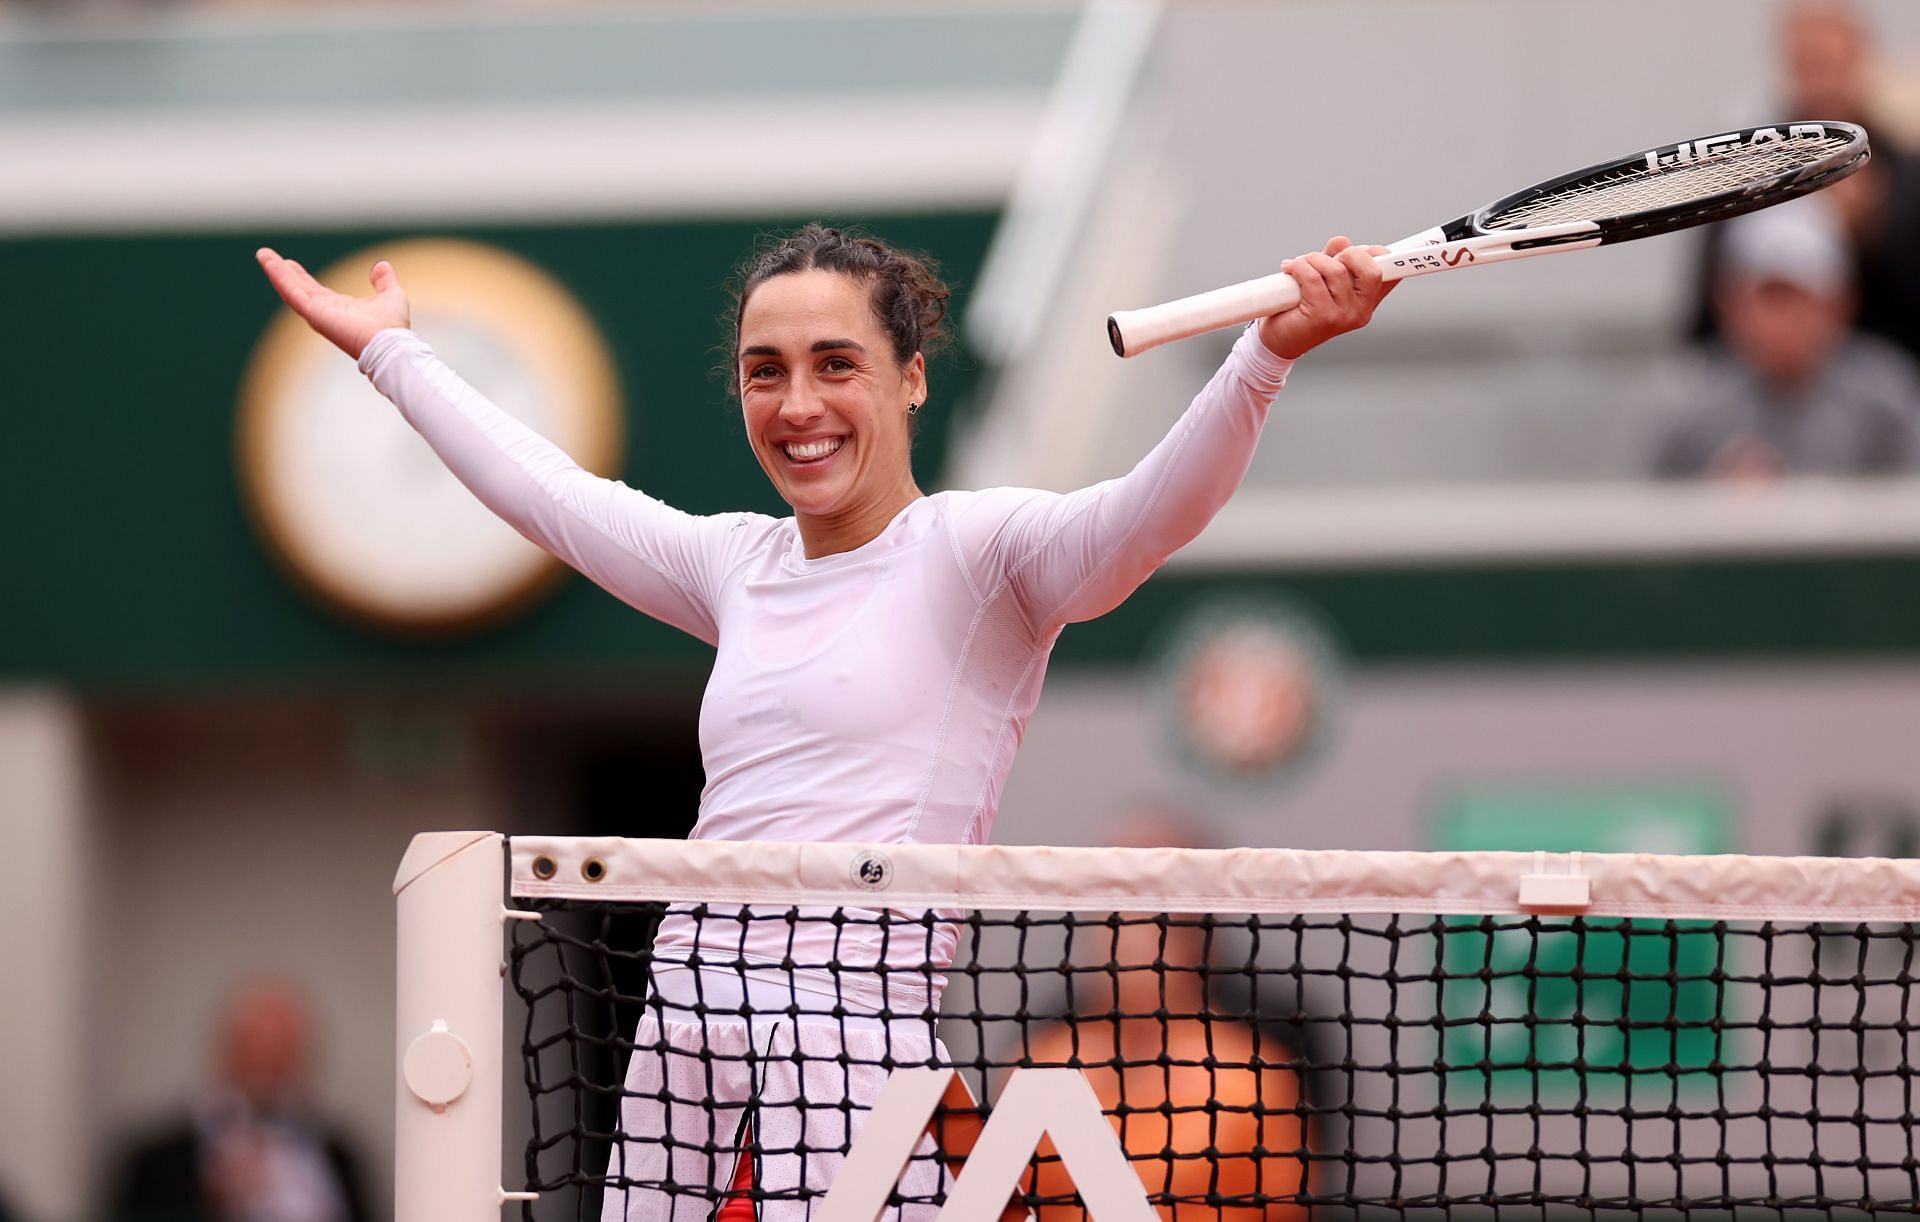 Martina Trevisan at the 2022 French Open.